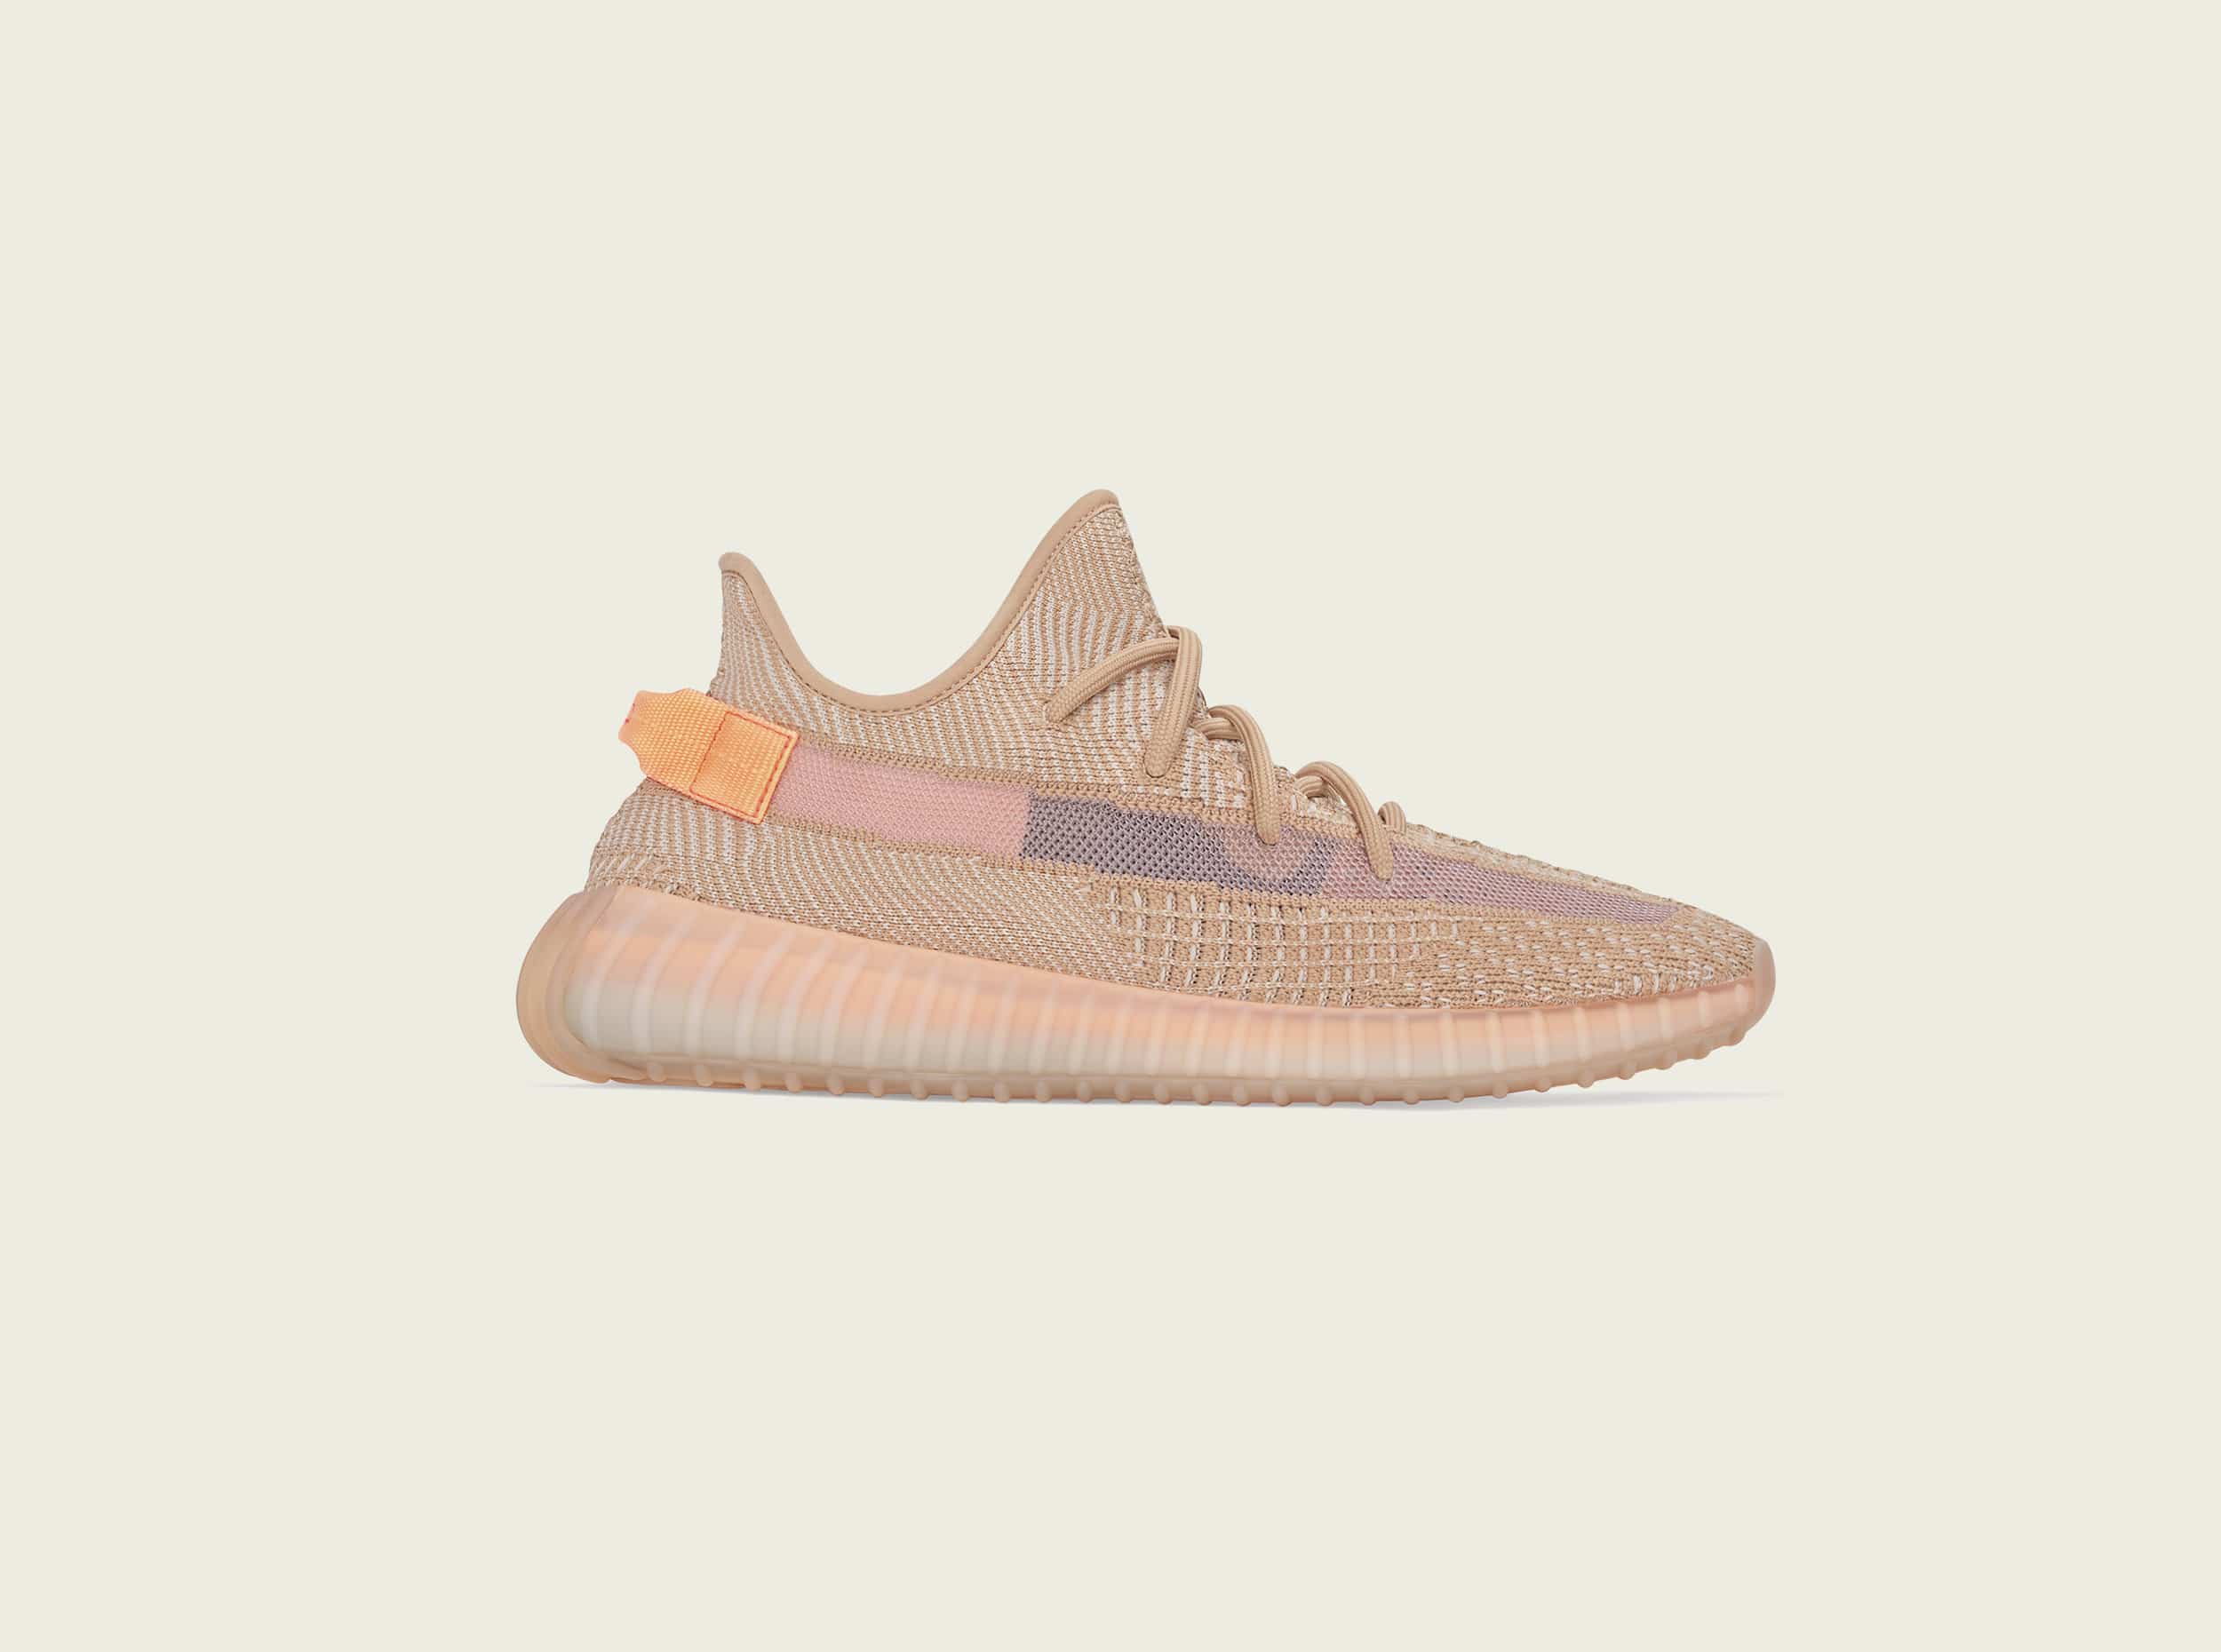 Adidas + kanye west announce the yeezy boost 350 v2 clay